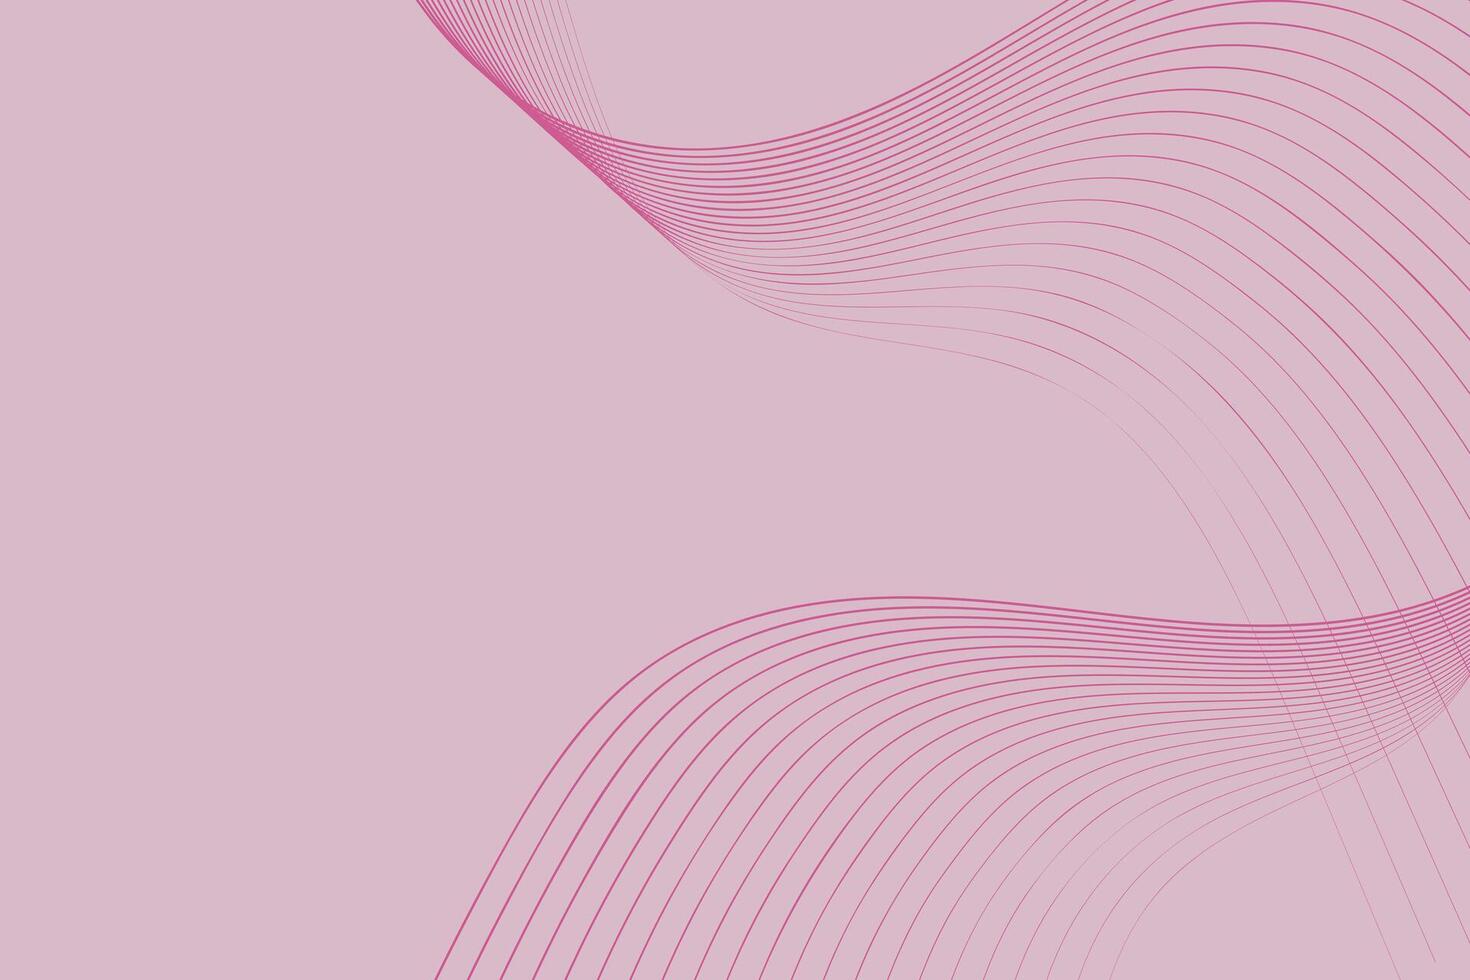 Vibrant pink background with a series of wavy lines running across it. The lines create a visually interesting pattern and add a dynamic element to the overall composition vector